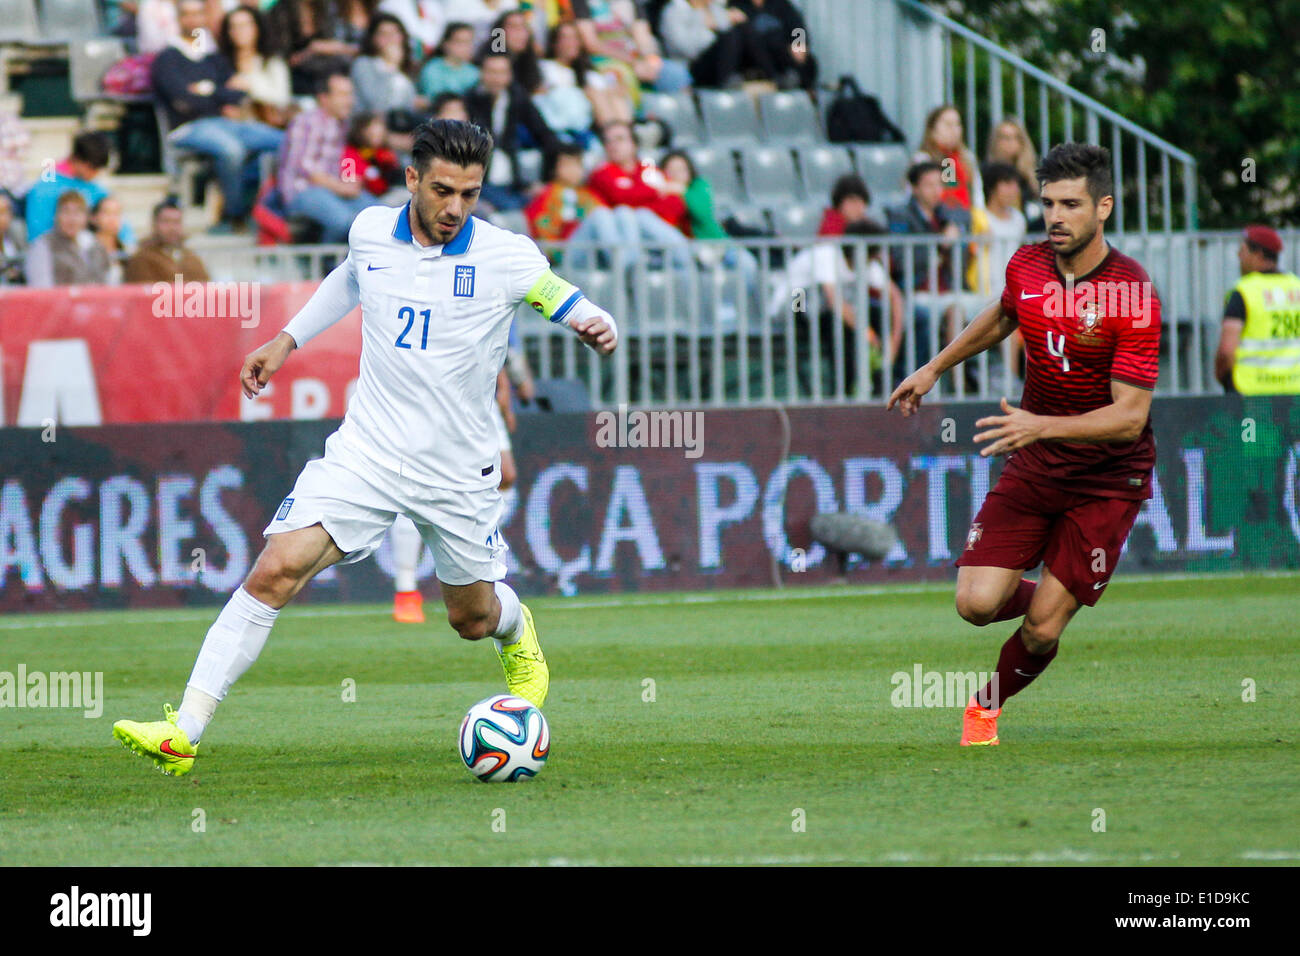 Lisbon, Porrtugal. 31st May, 2014. Greece midfielder Kostas Katsouranis (21) and Portugal midfielder Miguel Veloso (4) in action during preparatory friendly match for the World Cup at the National Stadium in Lisbon, Portugal, Saturday, May 31, 2014. Credit:  Leonardo Mota/Alamy Live News Stock Photo